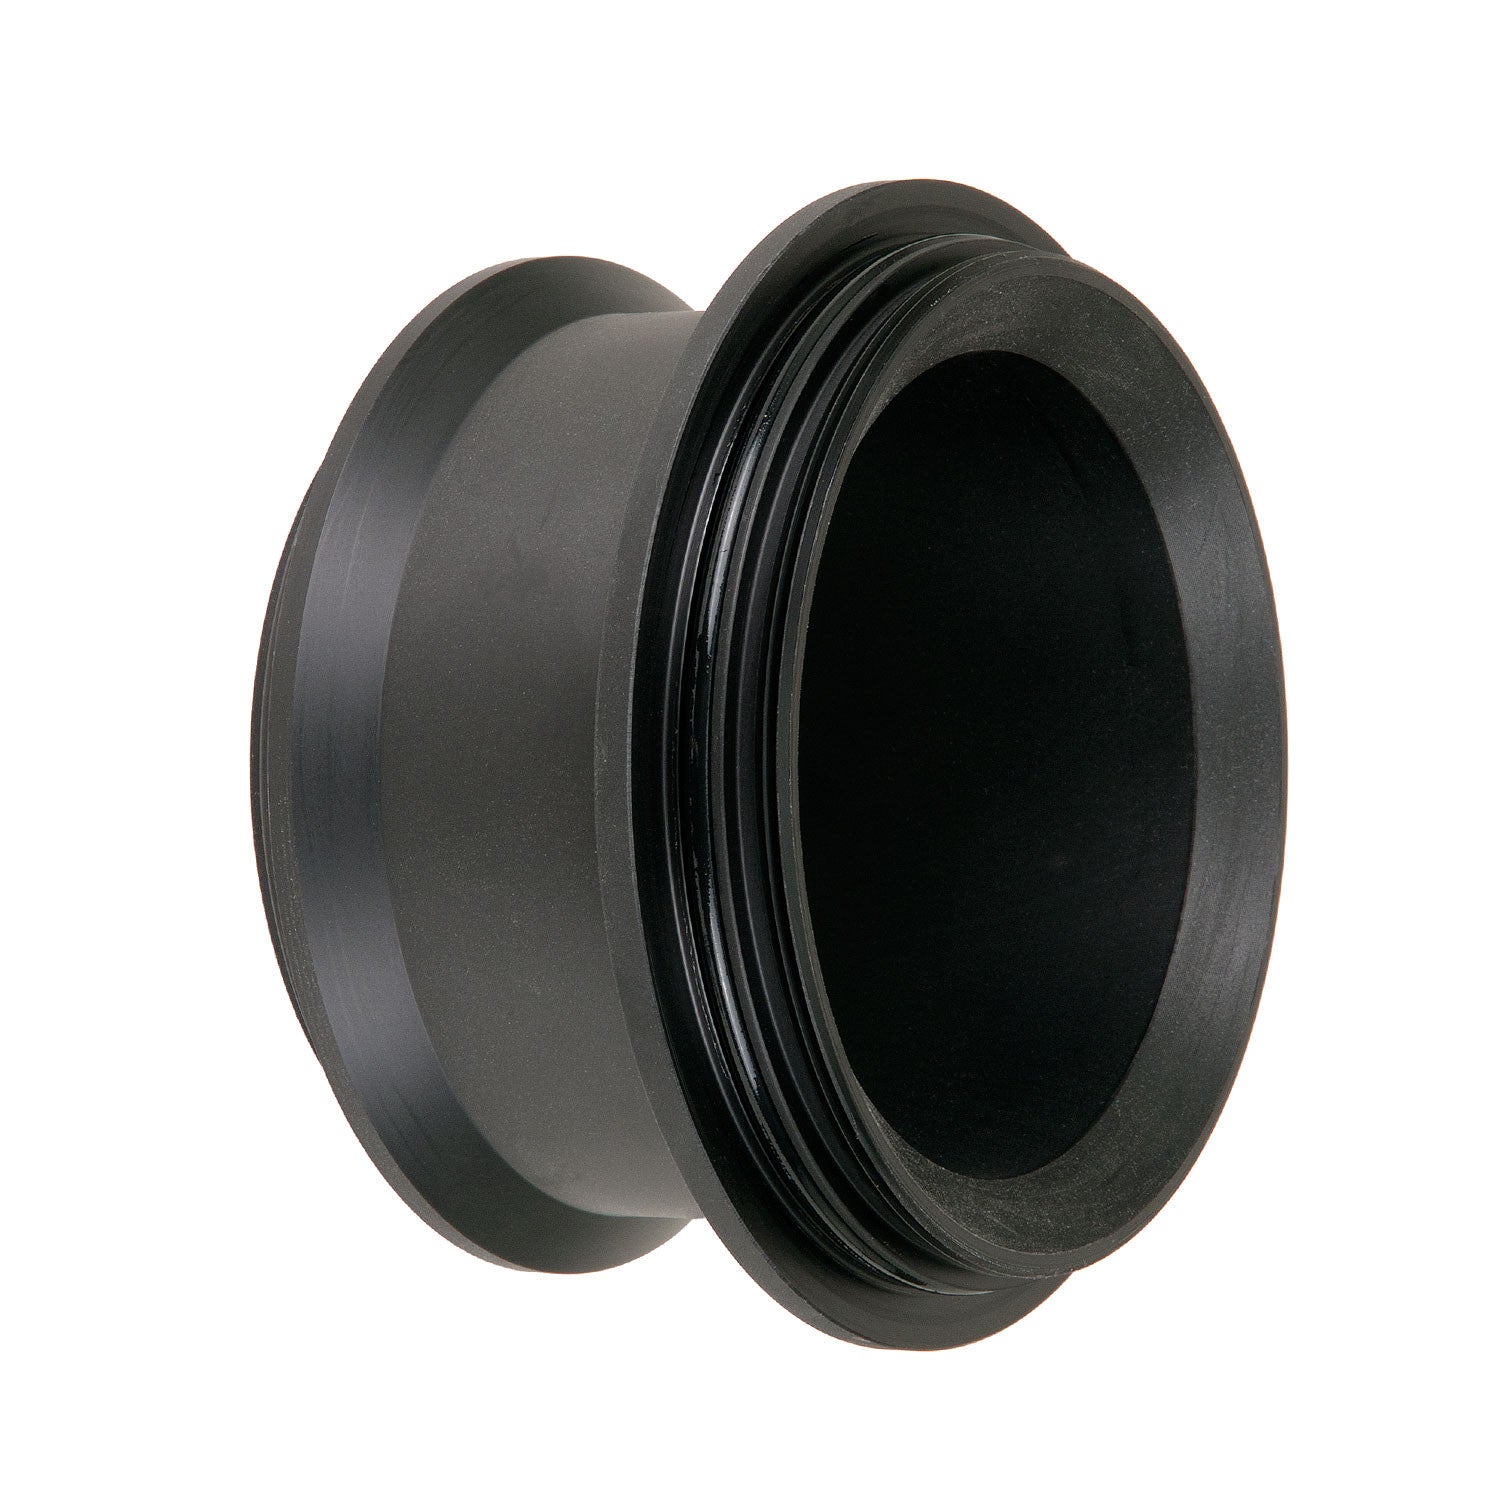 FL Extension for Lenses Up To 4.25 Inches